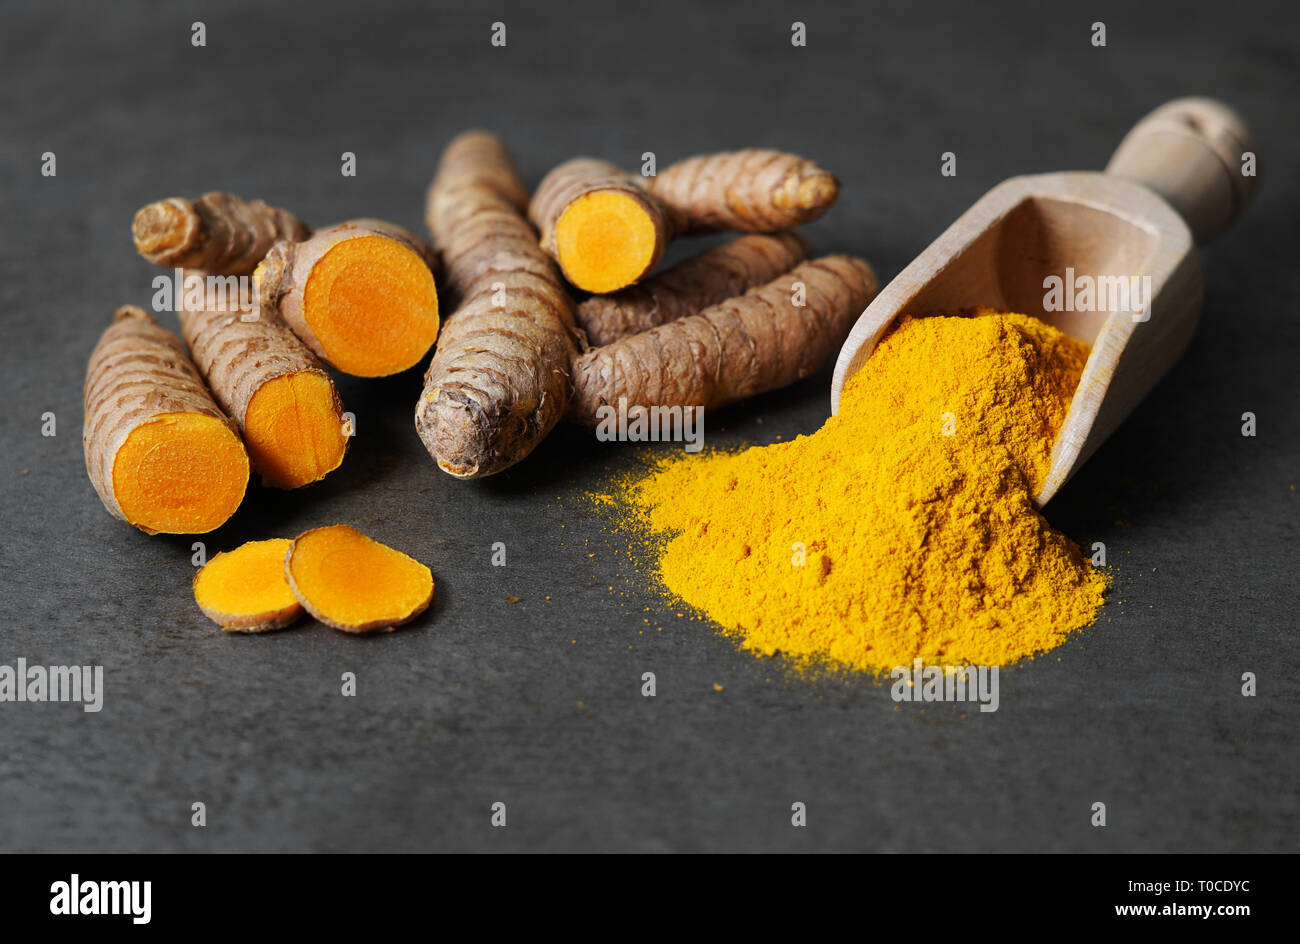 Turmeric powder healthy spice Asian food closeup of turmeric roots sliced and a wooden bailer on a rustic dark grey kitchen board. Stock Photo